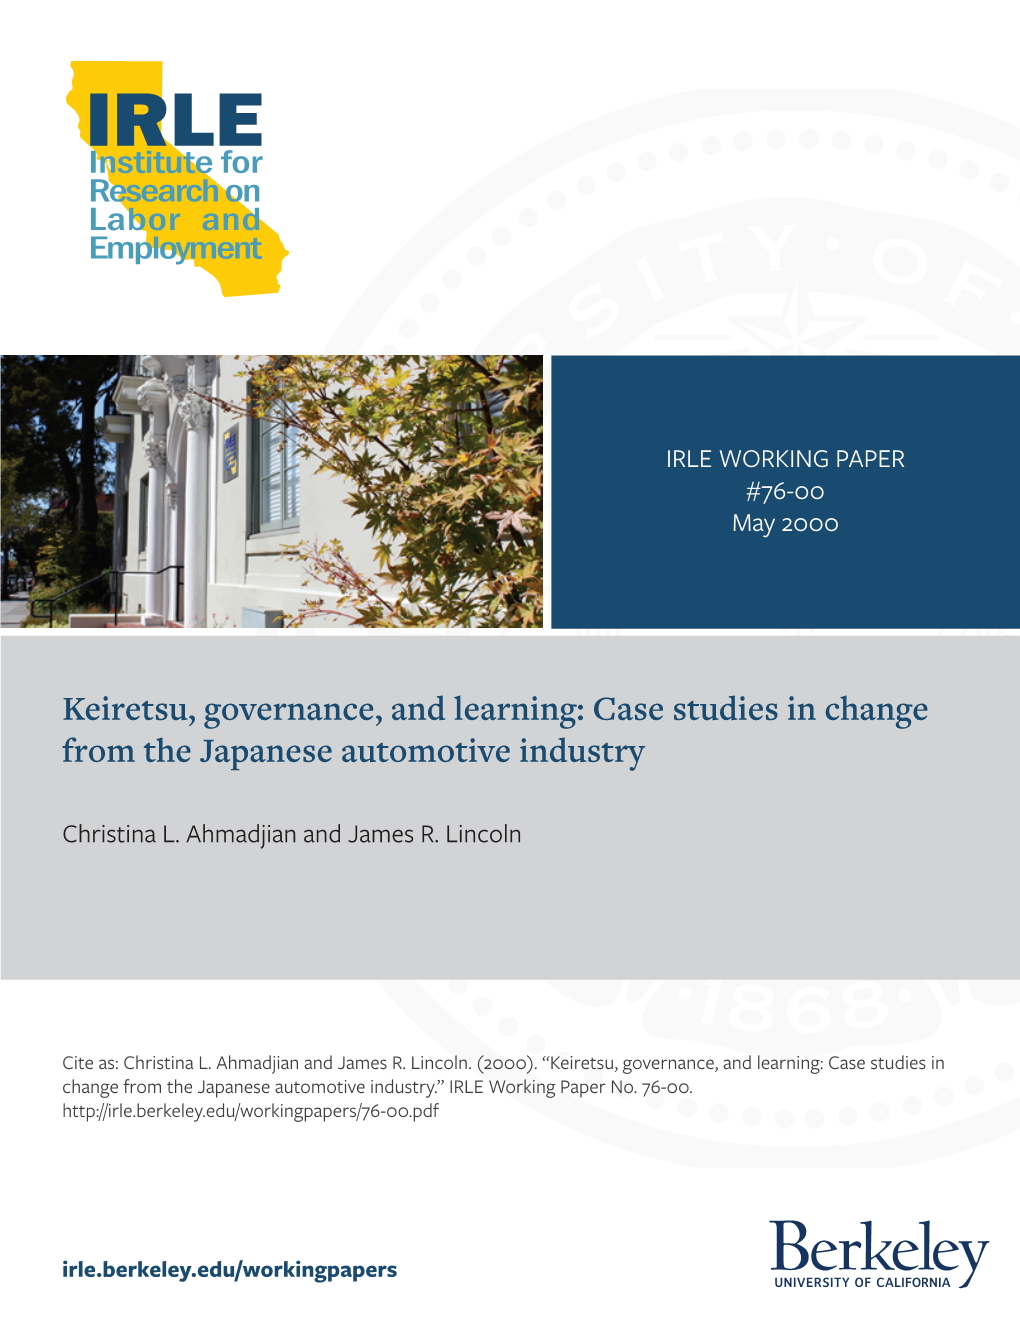 Keiretsu, Governance, and Learning: Case Studies in Change from the Japanese Automotive Industry